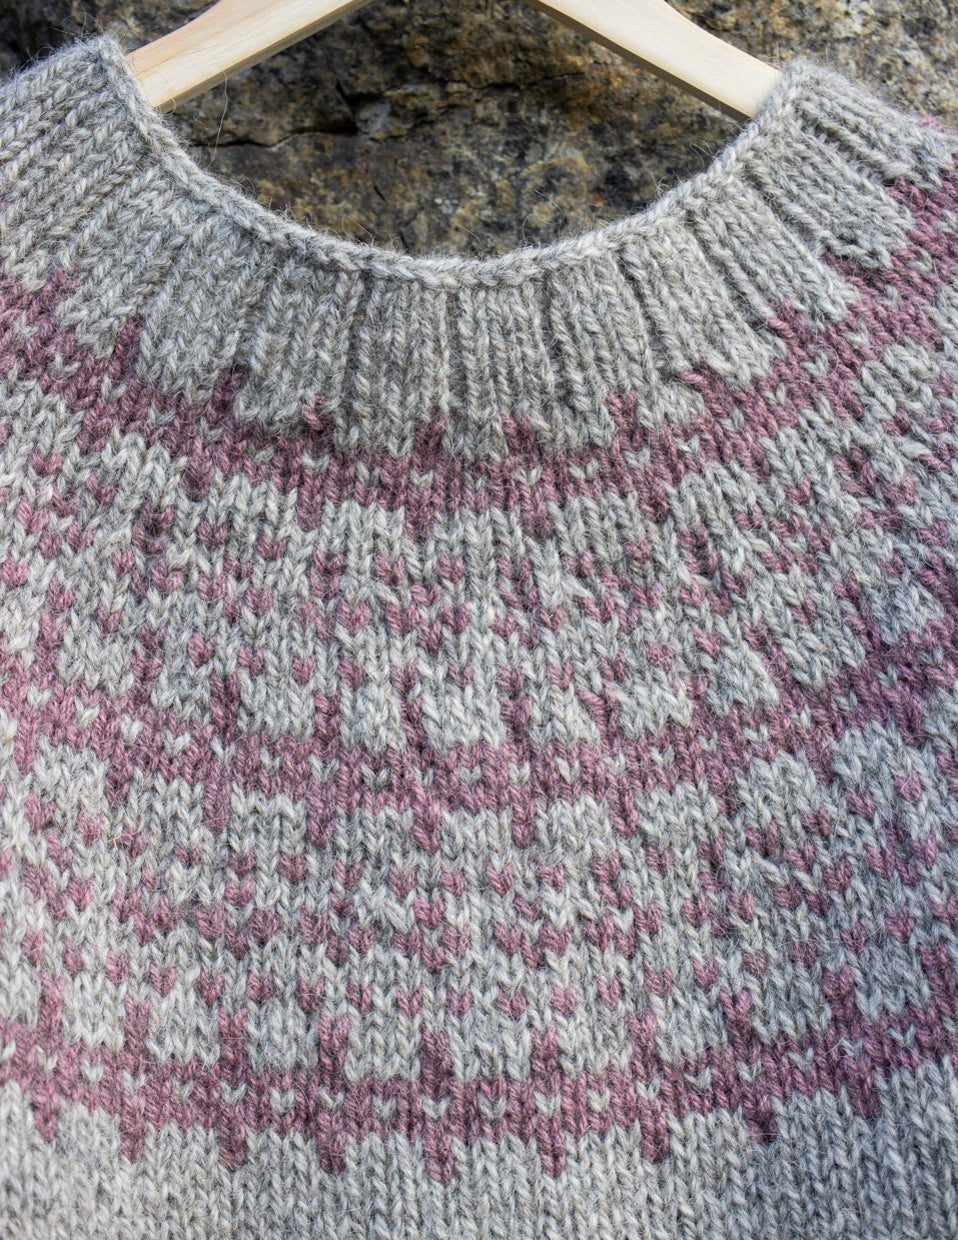 Salty Grains sweater knitting kit in STORM